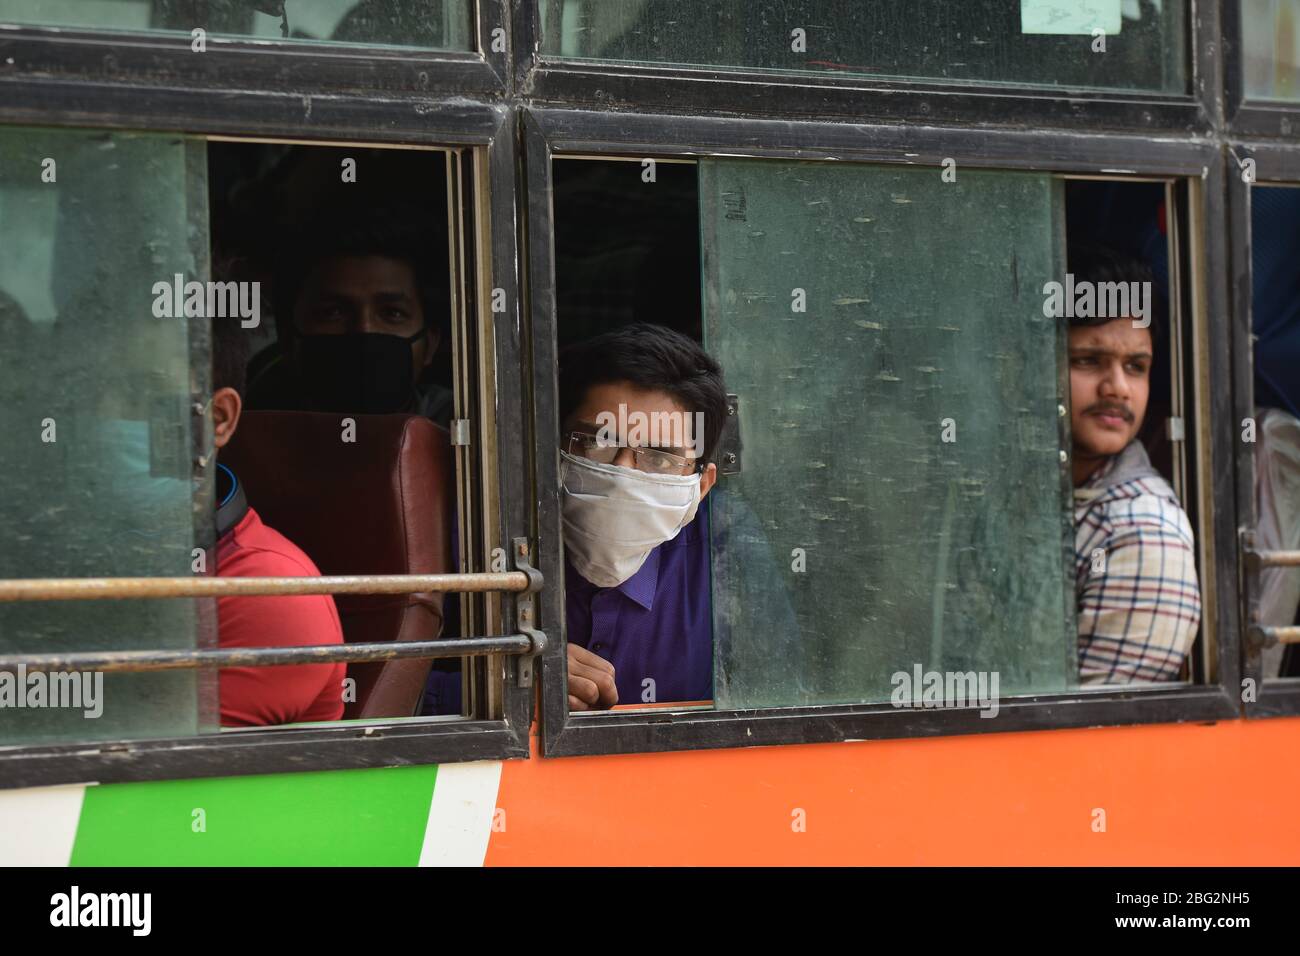 Prayagraj, Uttar Pradesh, India. 20th Apr, 2020. Prayagraj: Stranded Students get out of a bus arranged by the Uttar Pradesh government to drive them from Kota in Rajasthan state during a nationwide lockdown imposed as a preventive measure against the COVID-19 coronavirus, in Prayagraj on Monday, April 20, 2020. Credit: Prabhat Kumar Verma/ZUMA Wire/Alamy Live News Stock Photo